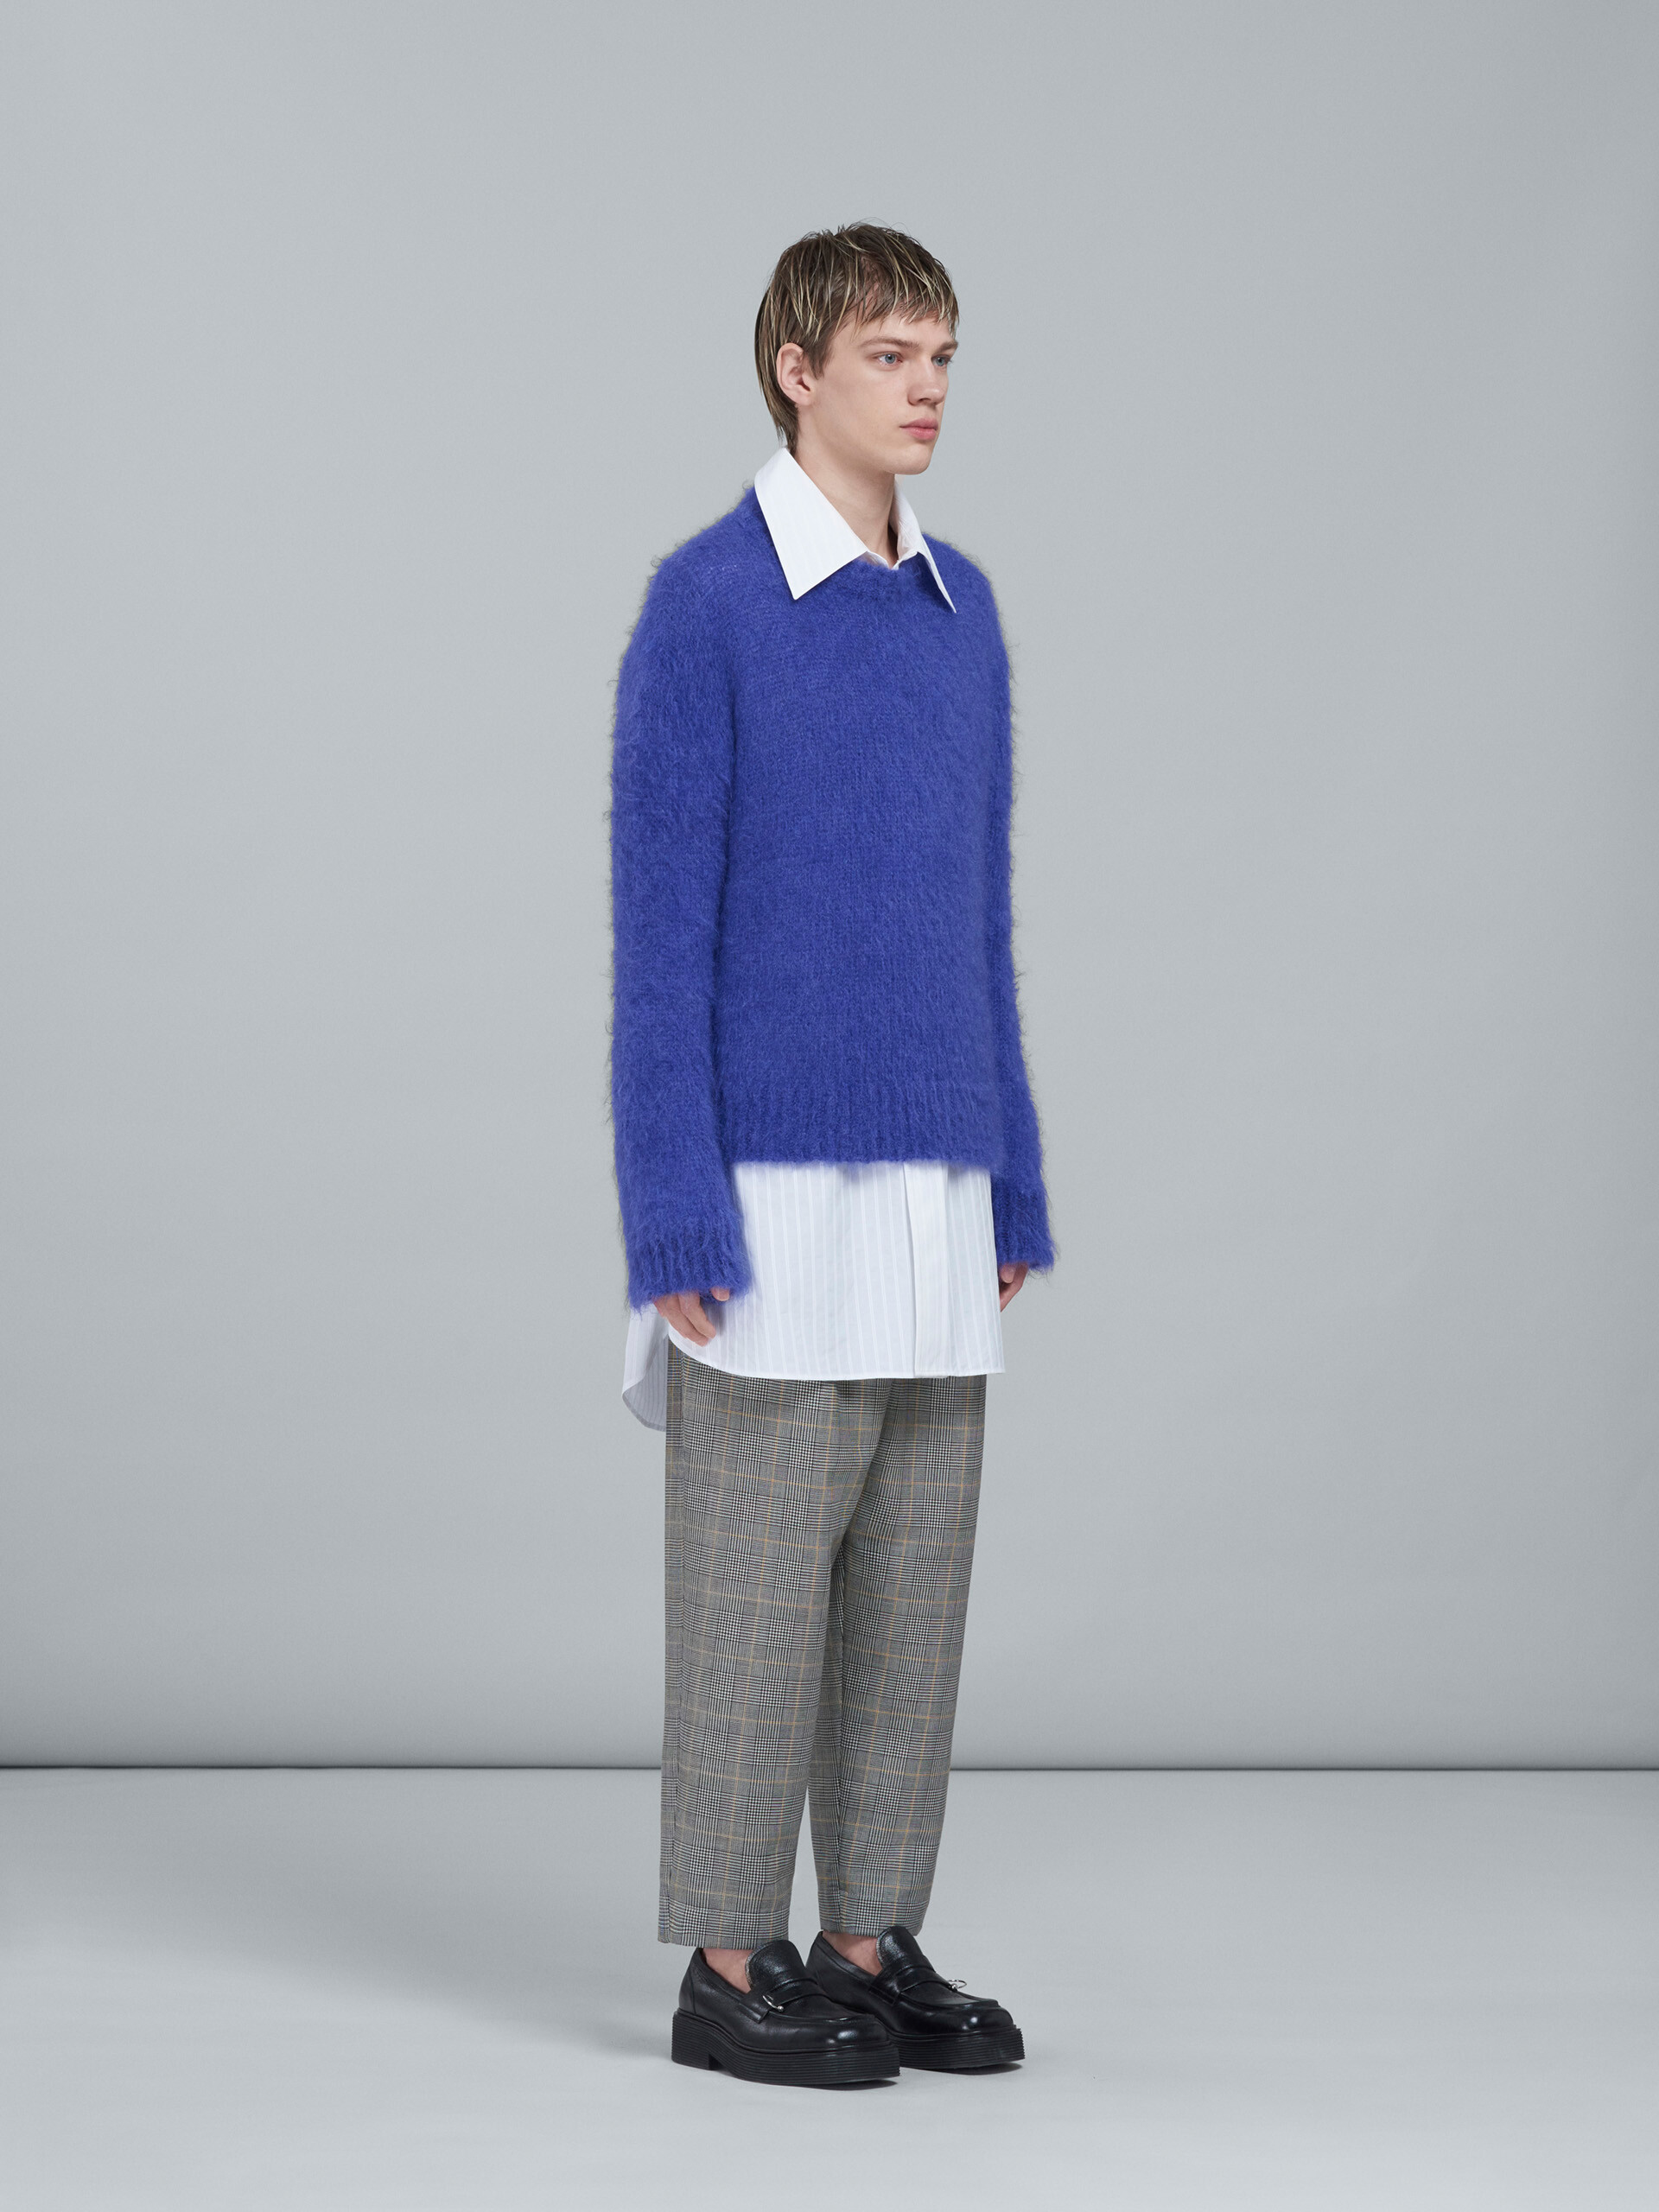 Mohair and wool crewneck sweater - Pullovers - Image 5